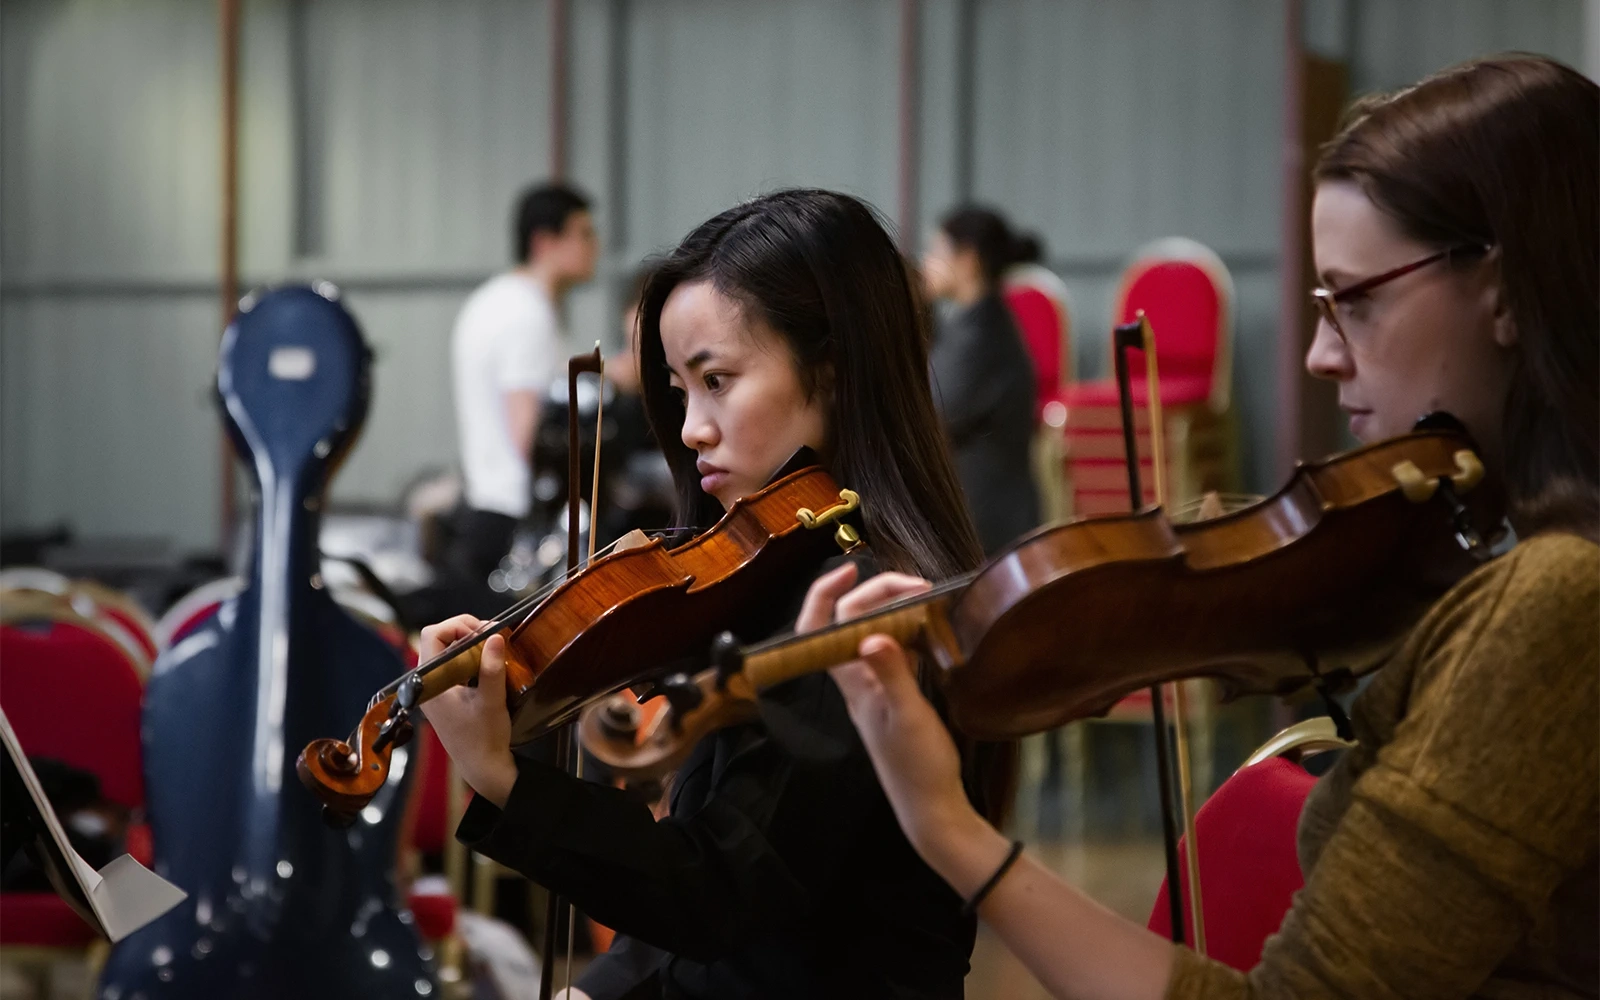 Two young women women playing violins during concert rehearsals